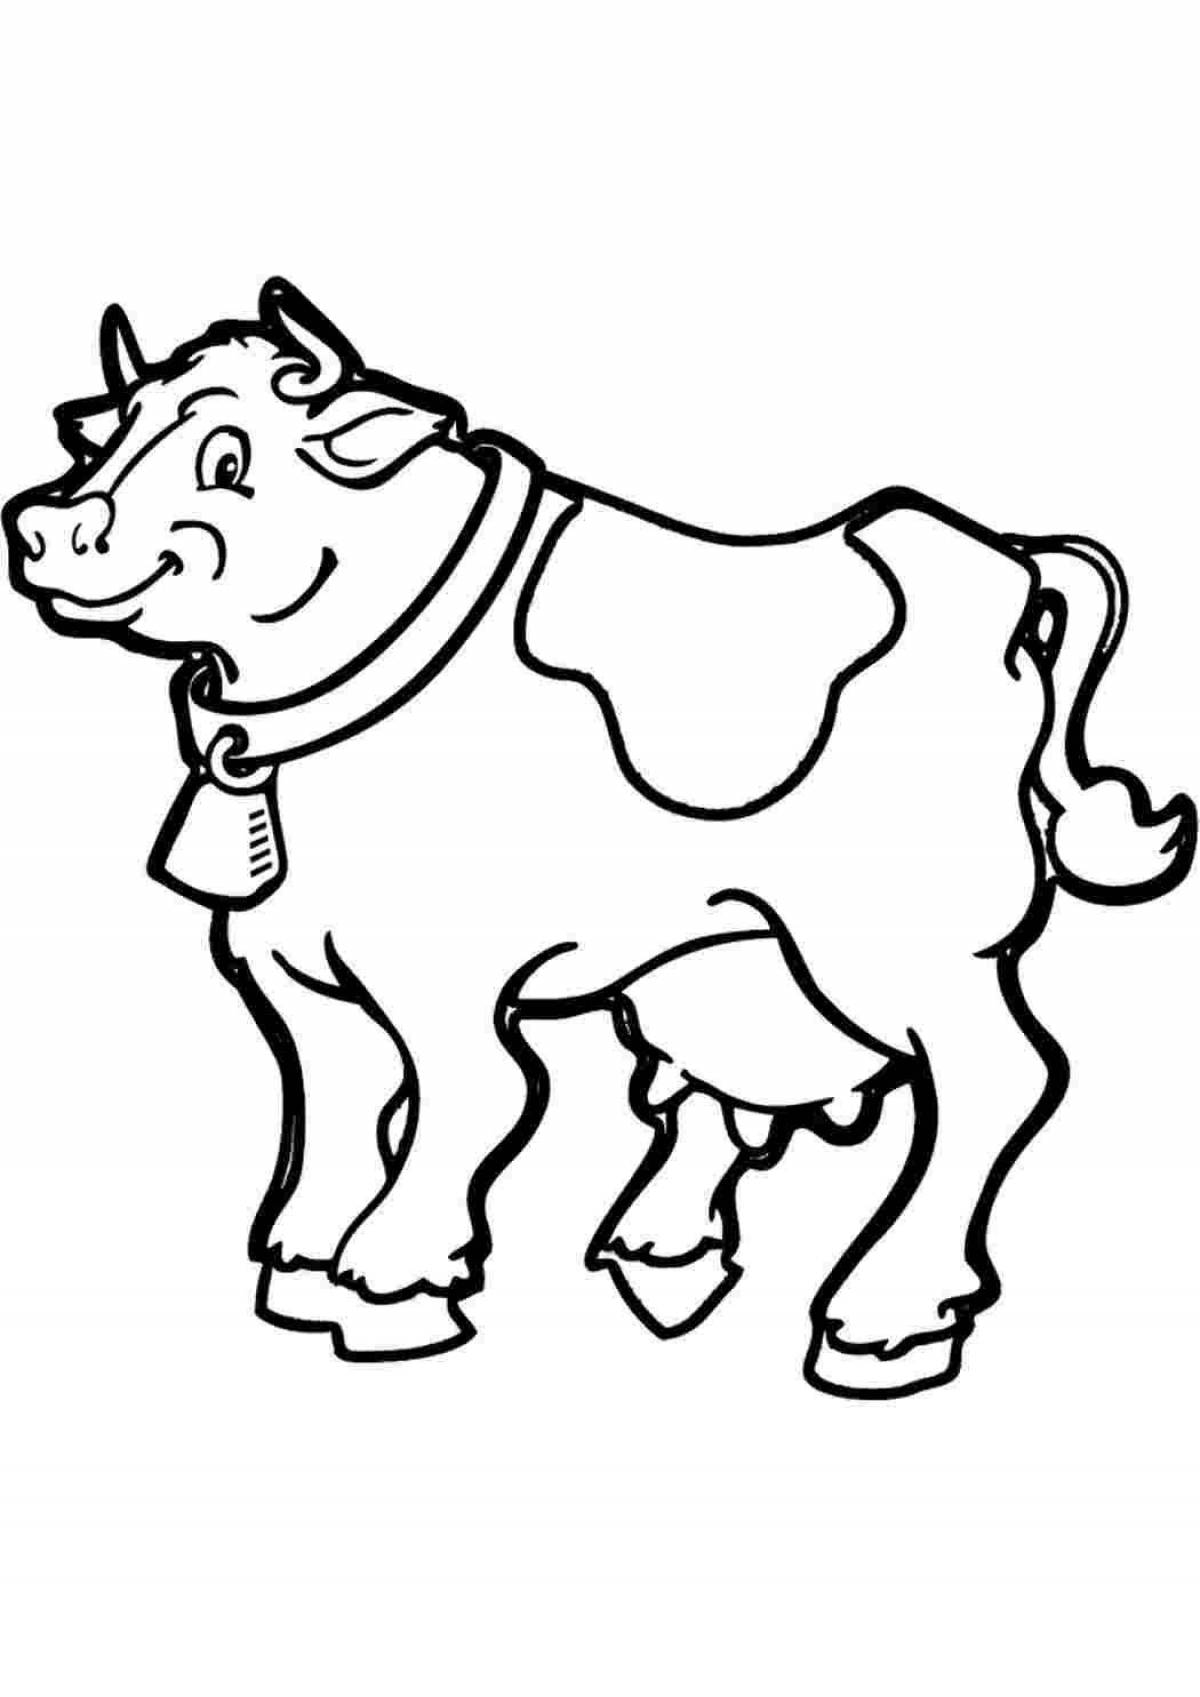 Coloring bright yellow cow